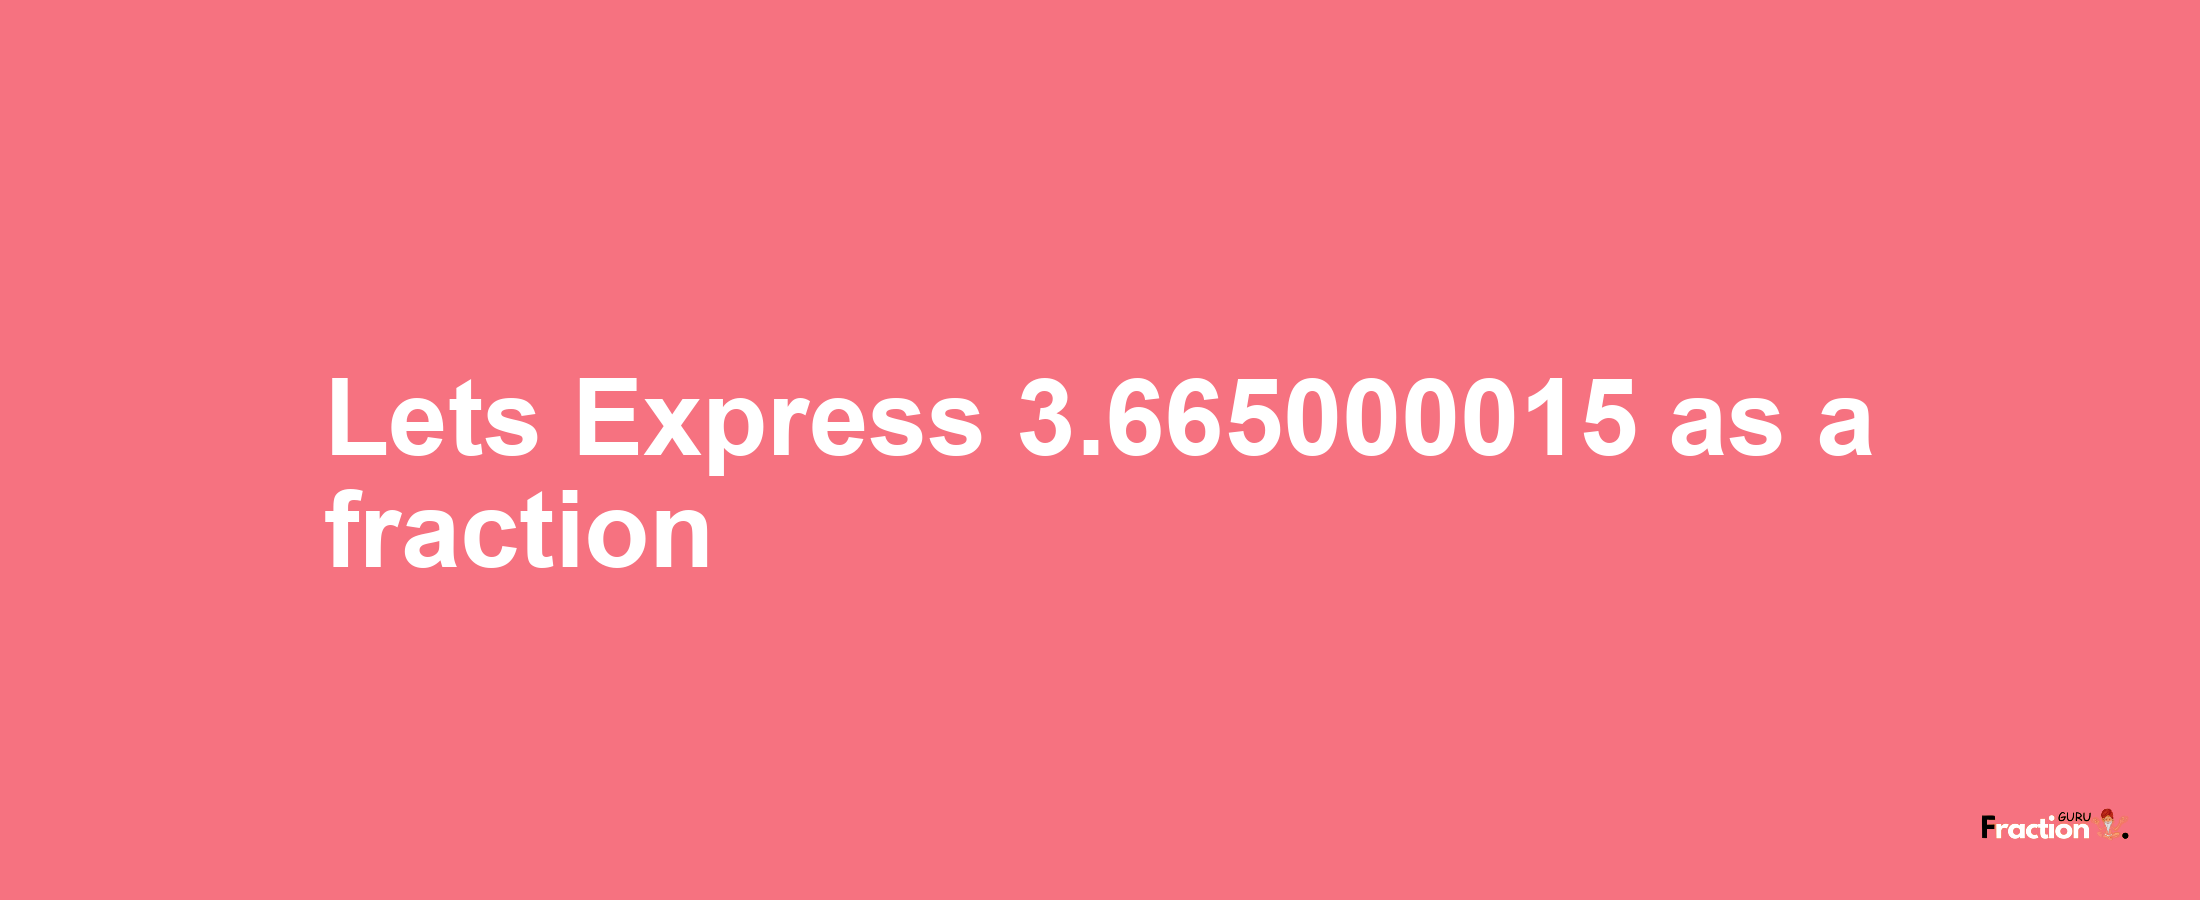 Lets Express 3.665000015 as afraction